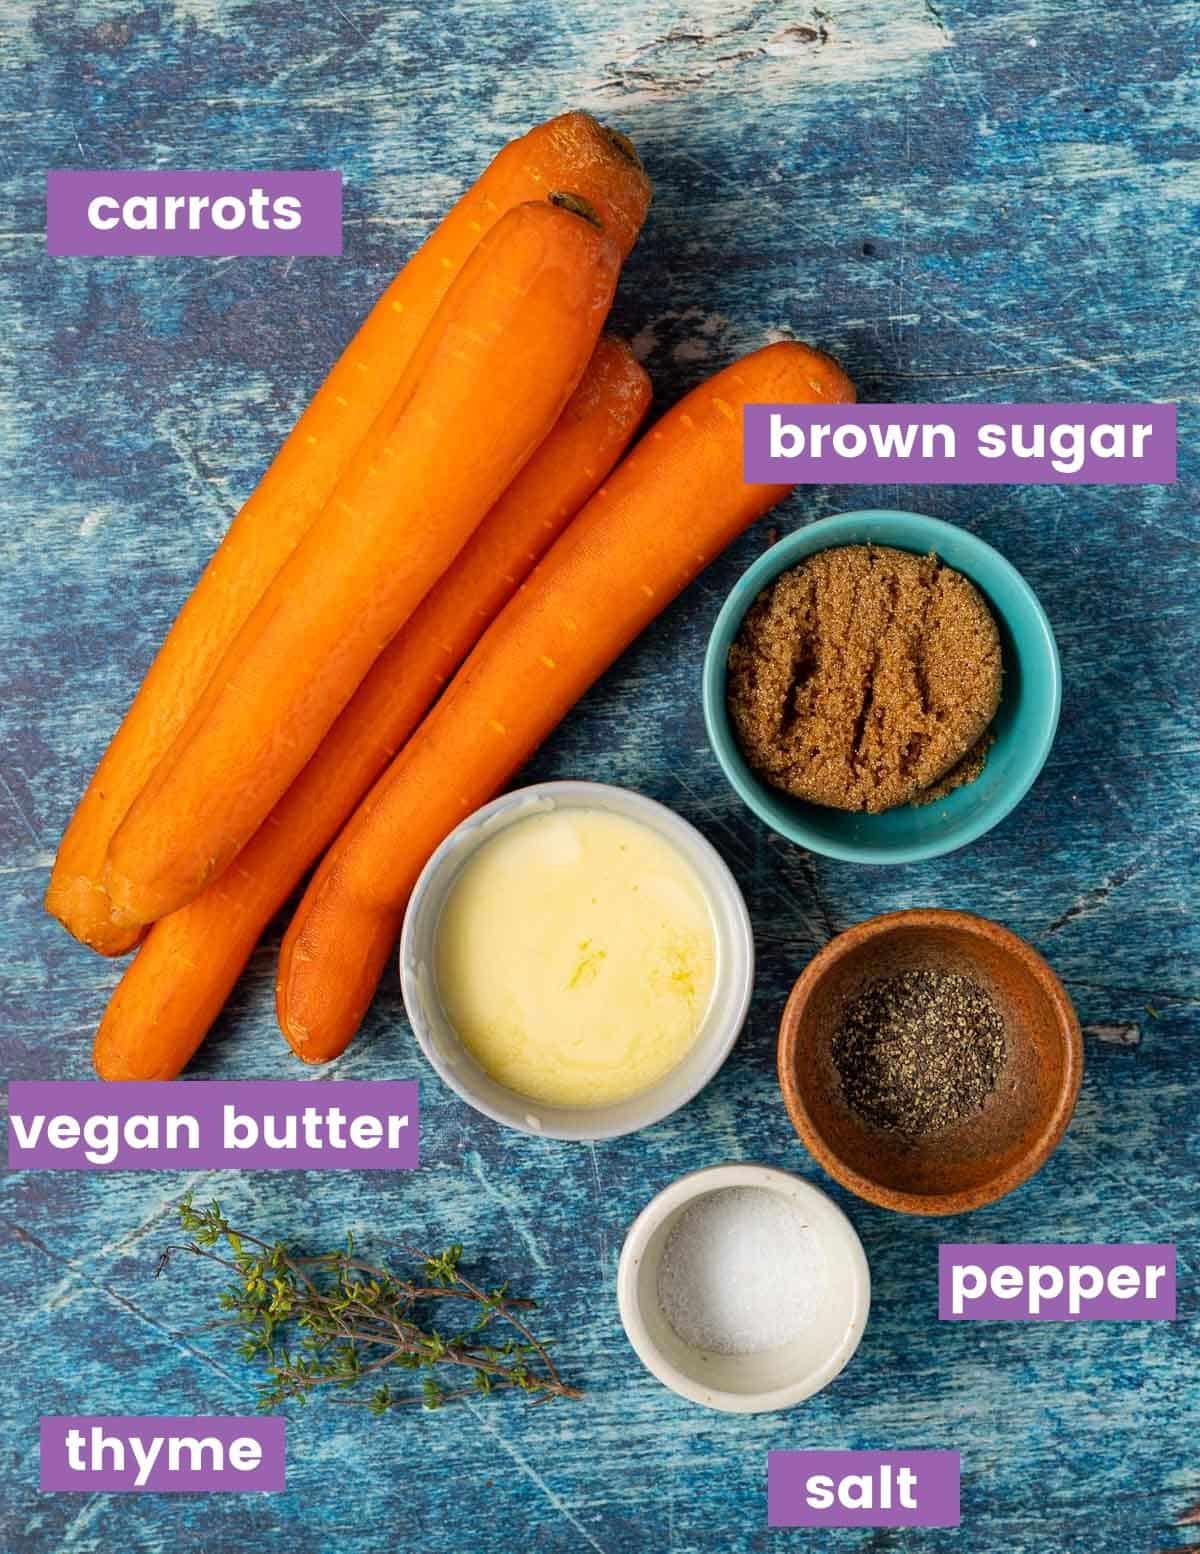 ingredients for air fryer carrots as per the written ingredient list